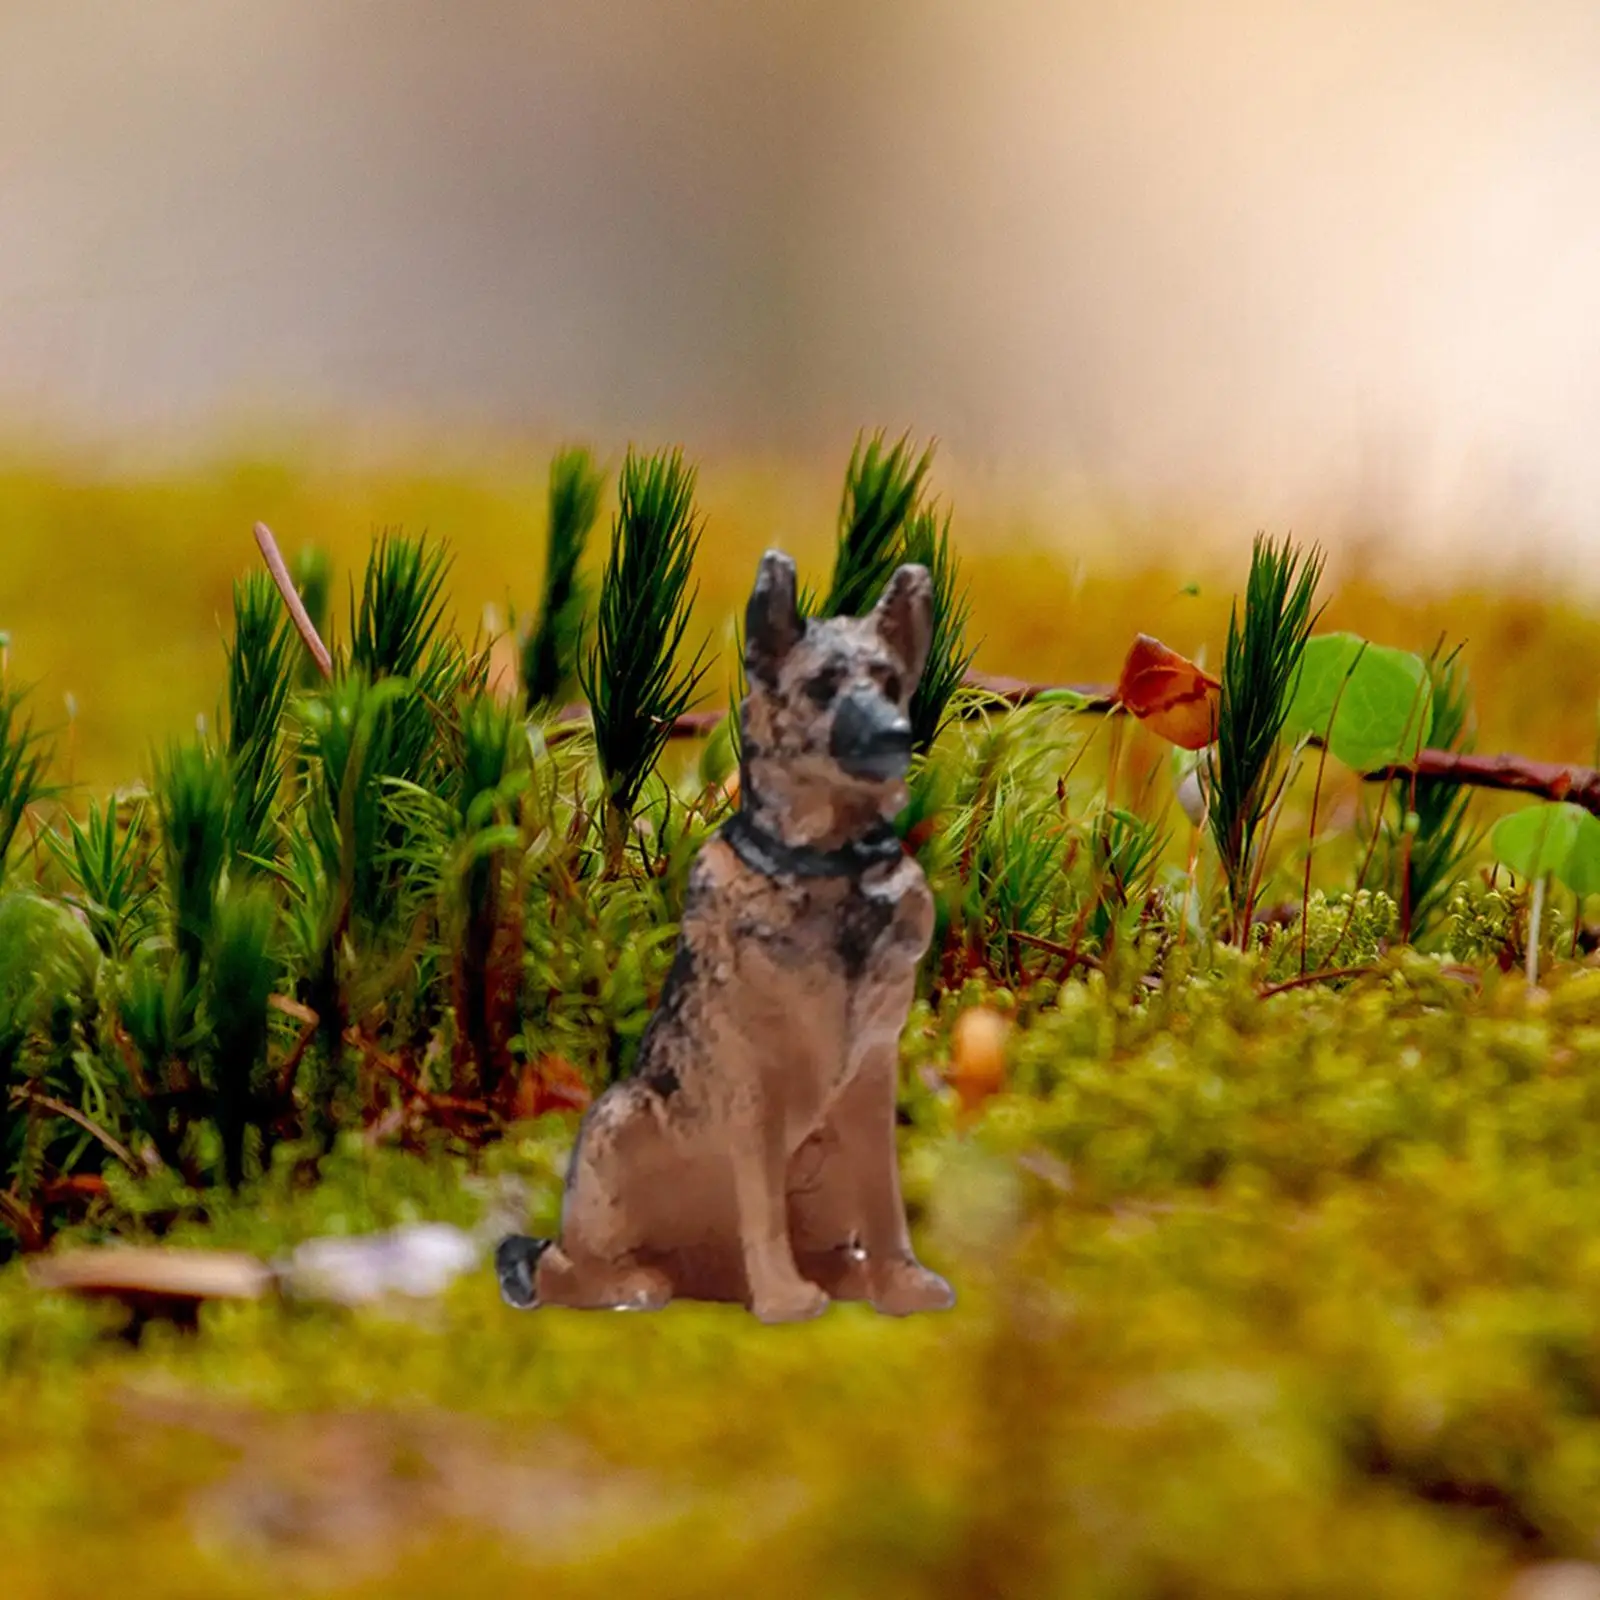 1:64 Scale Tiny Dog Micro Landscape Movie Props Layout S Scale Hand Painted Figurines Diorama Scenery Miniature Decor